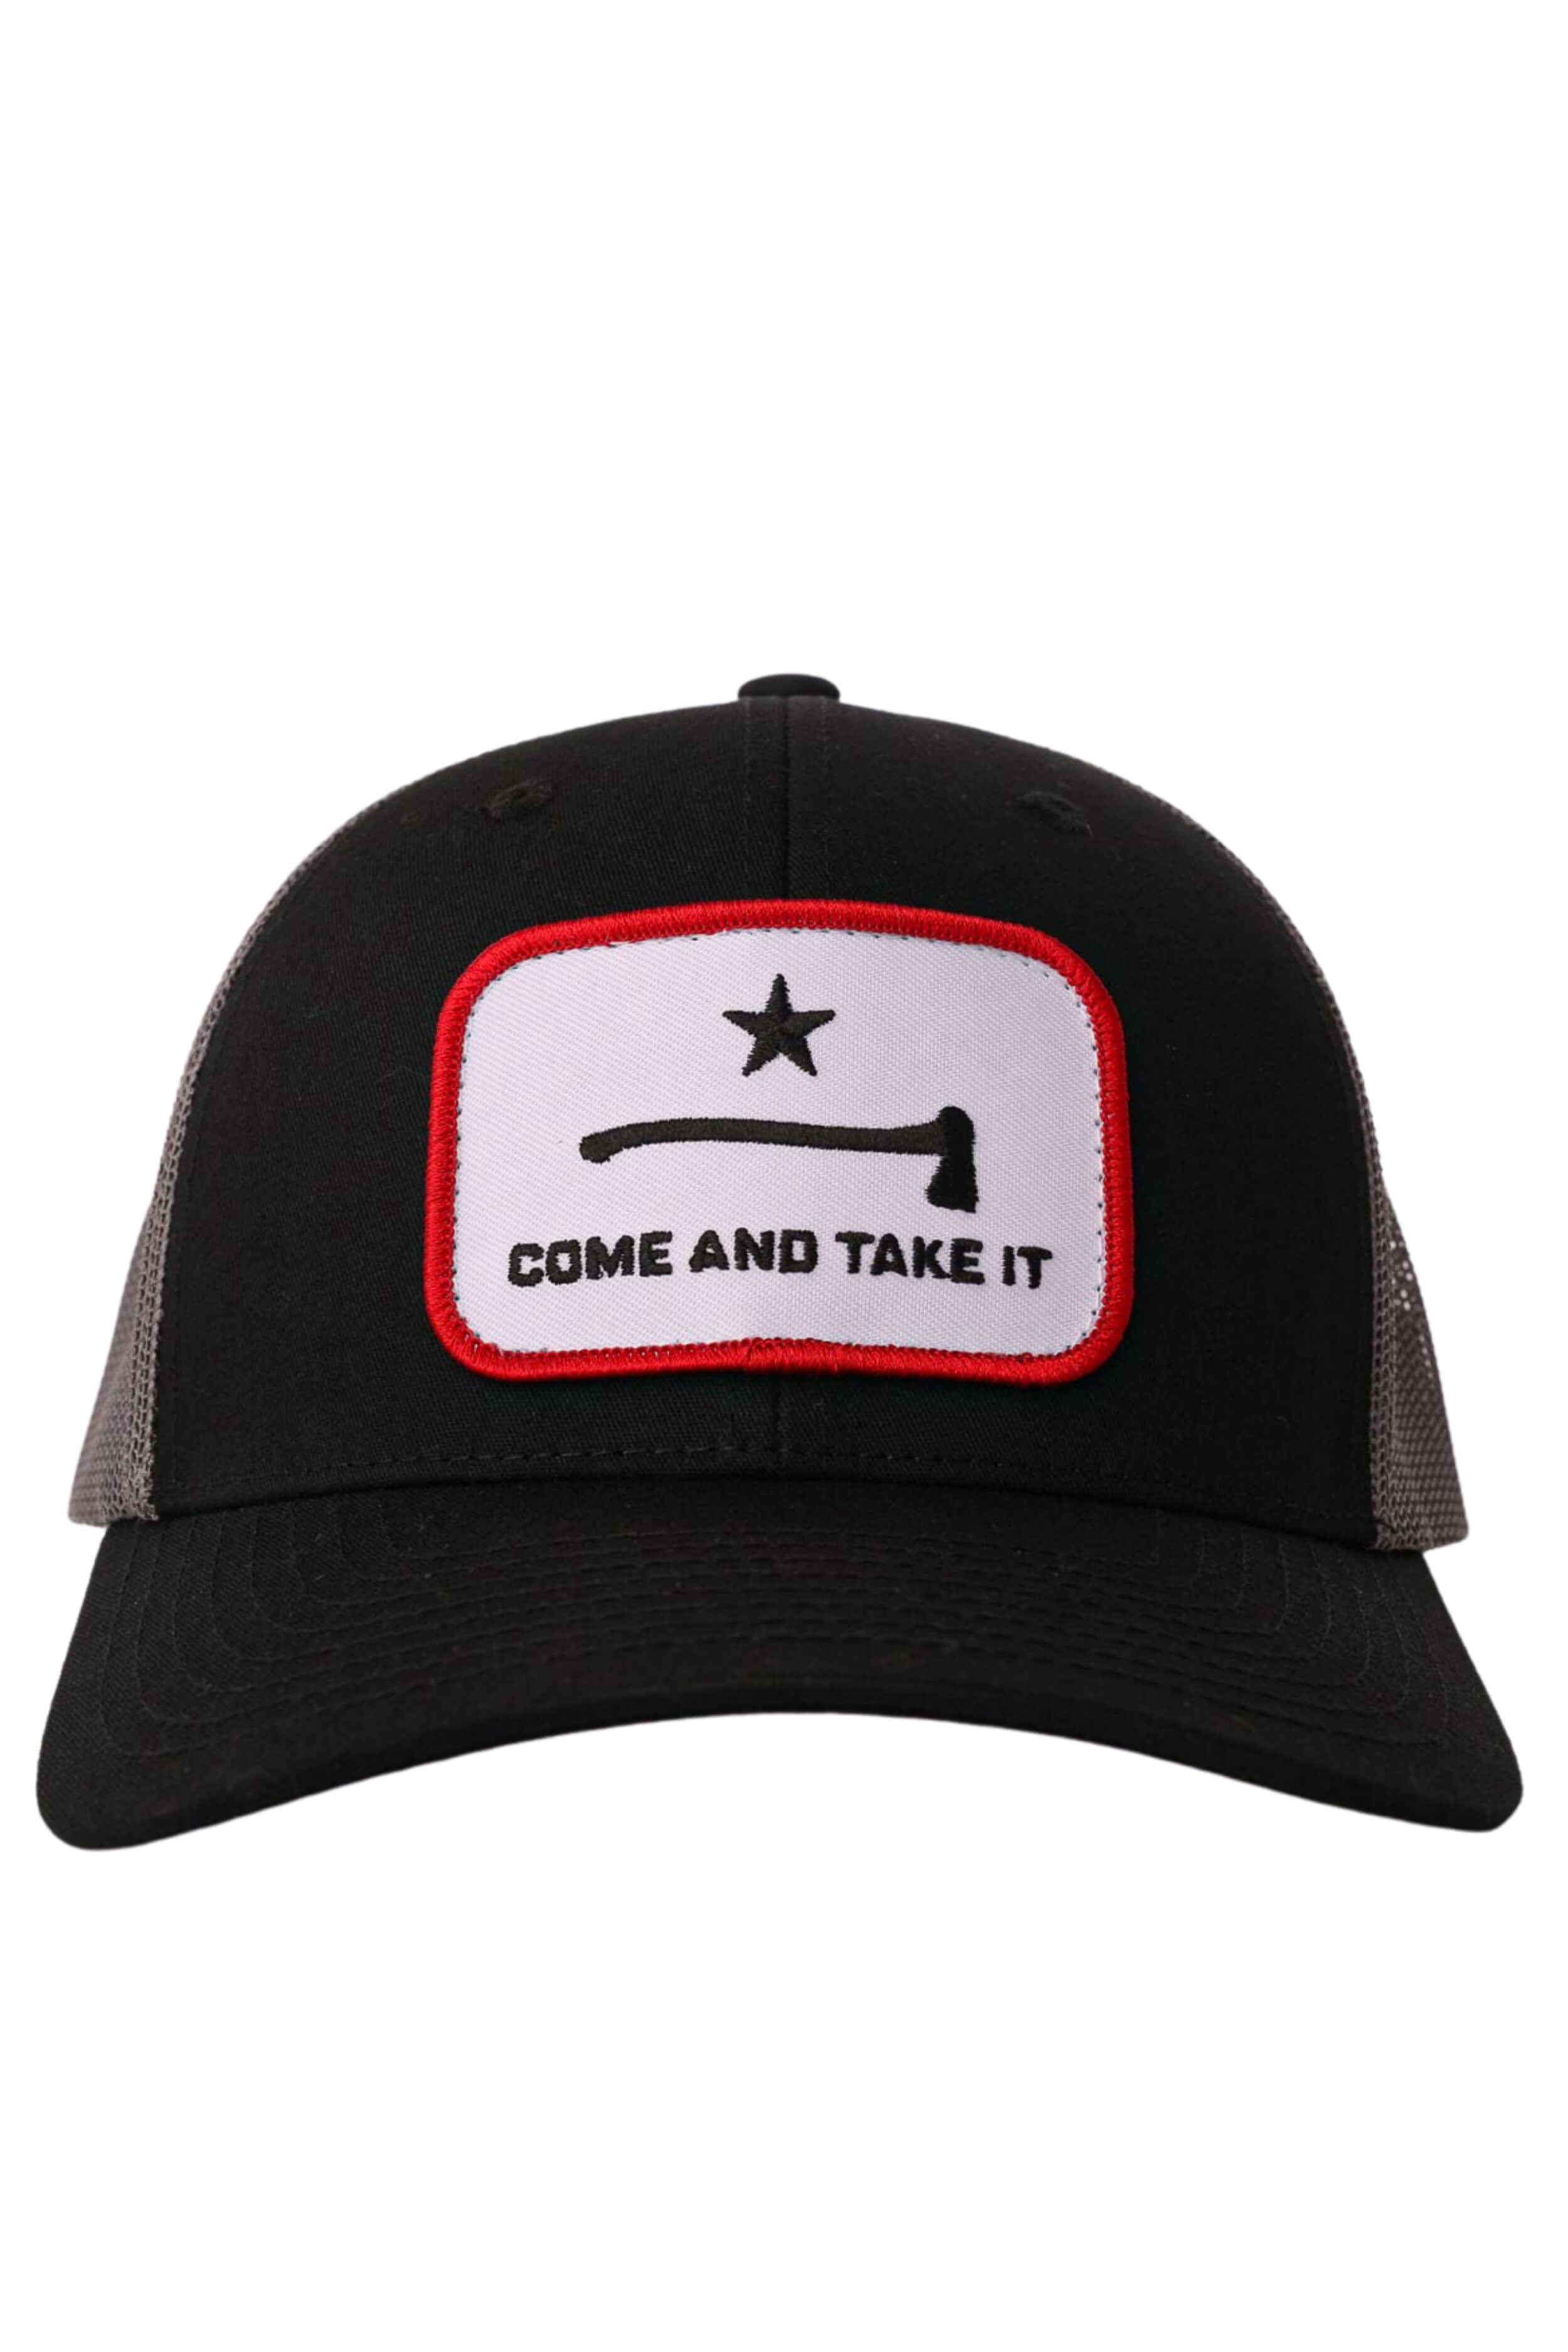 Come And Take It Snap-Back Hat - Woodroad Gear Co.